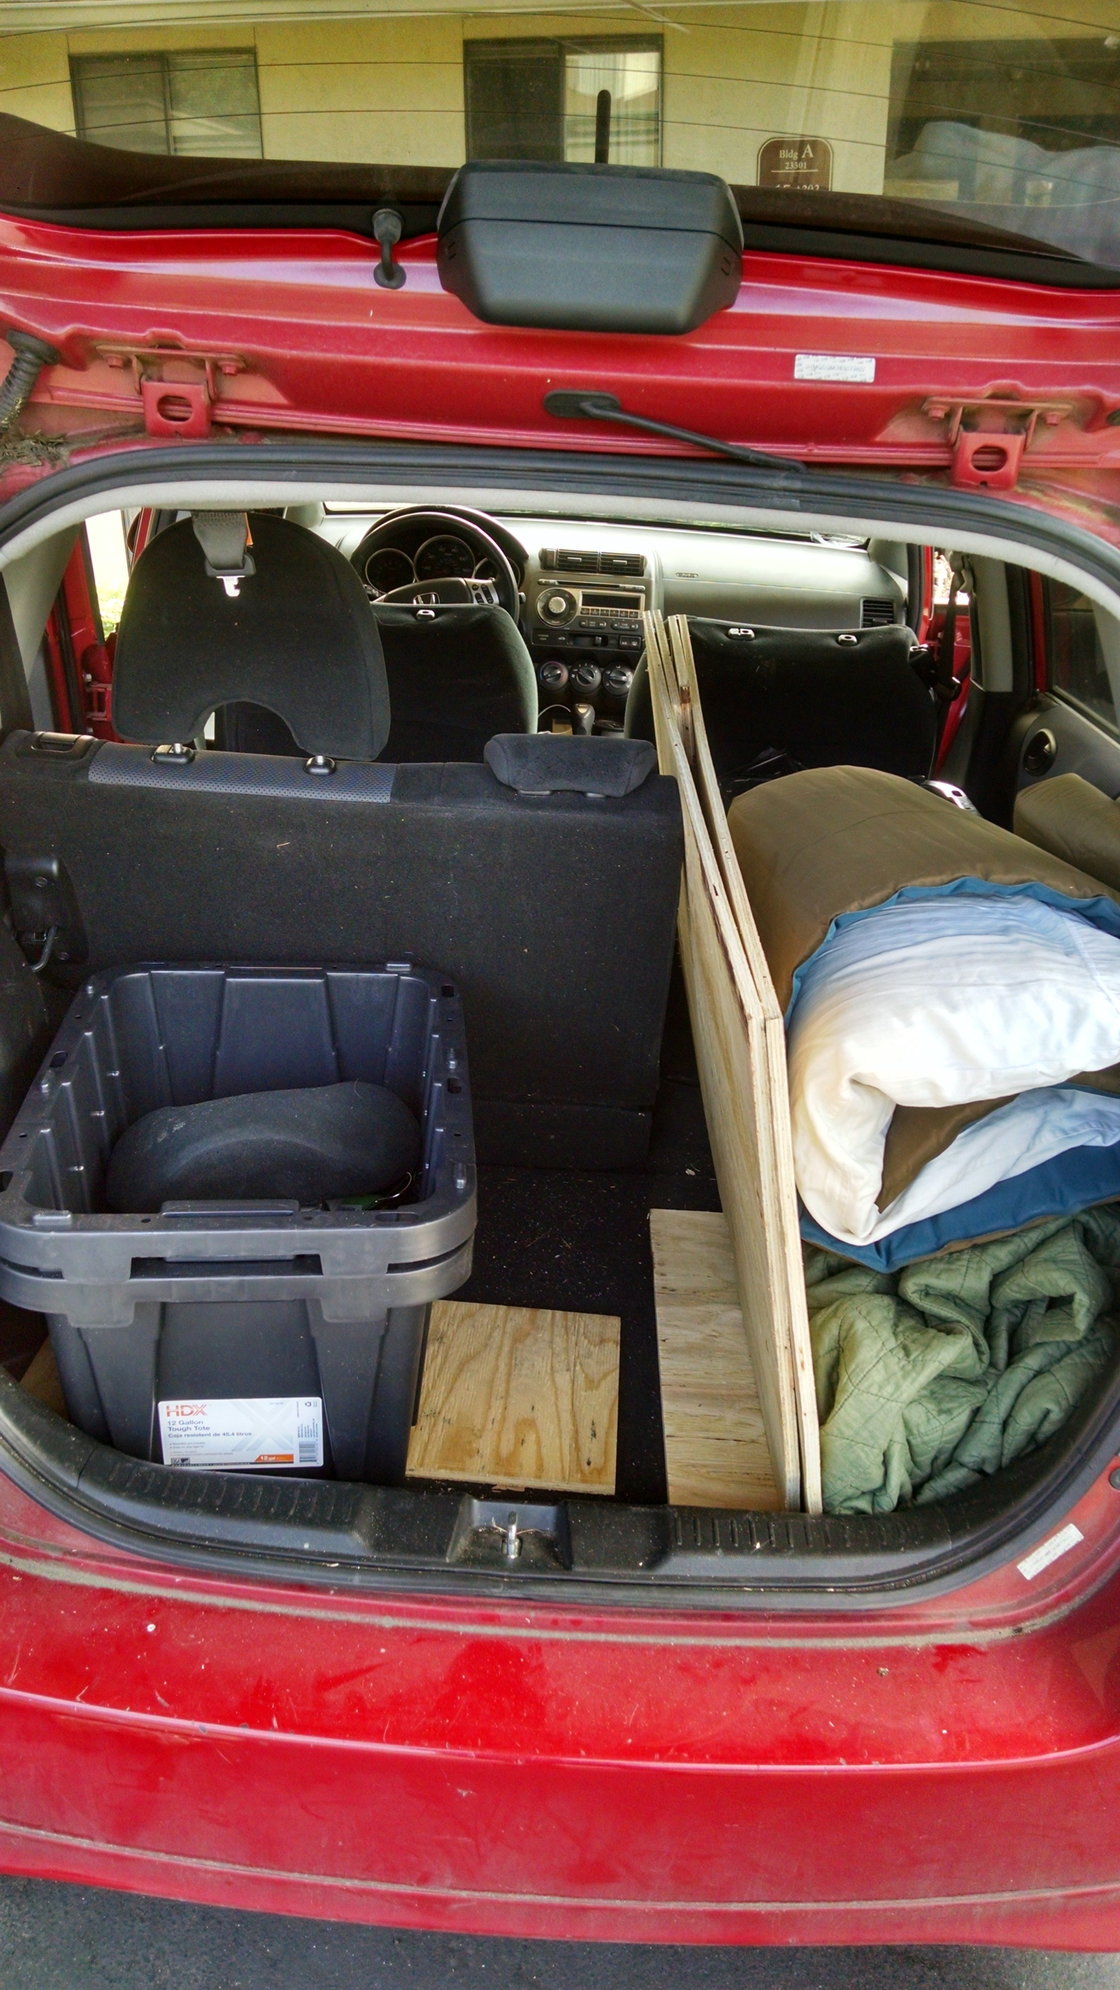 Turning my Fit into a mobile camper! - Page 3 - Unofficial Honda FIT Forums